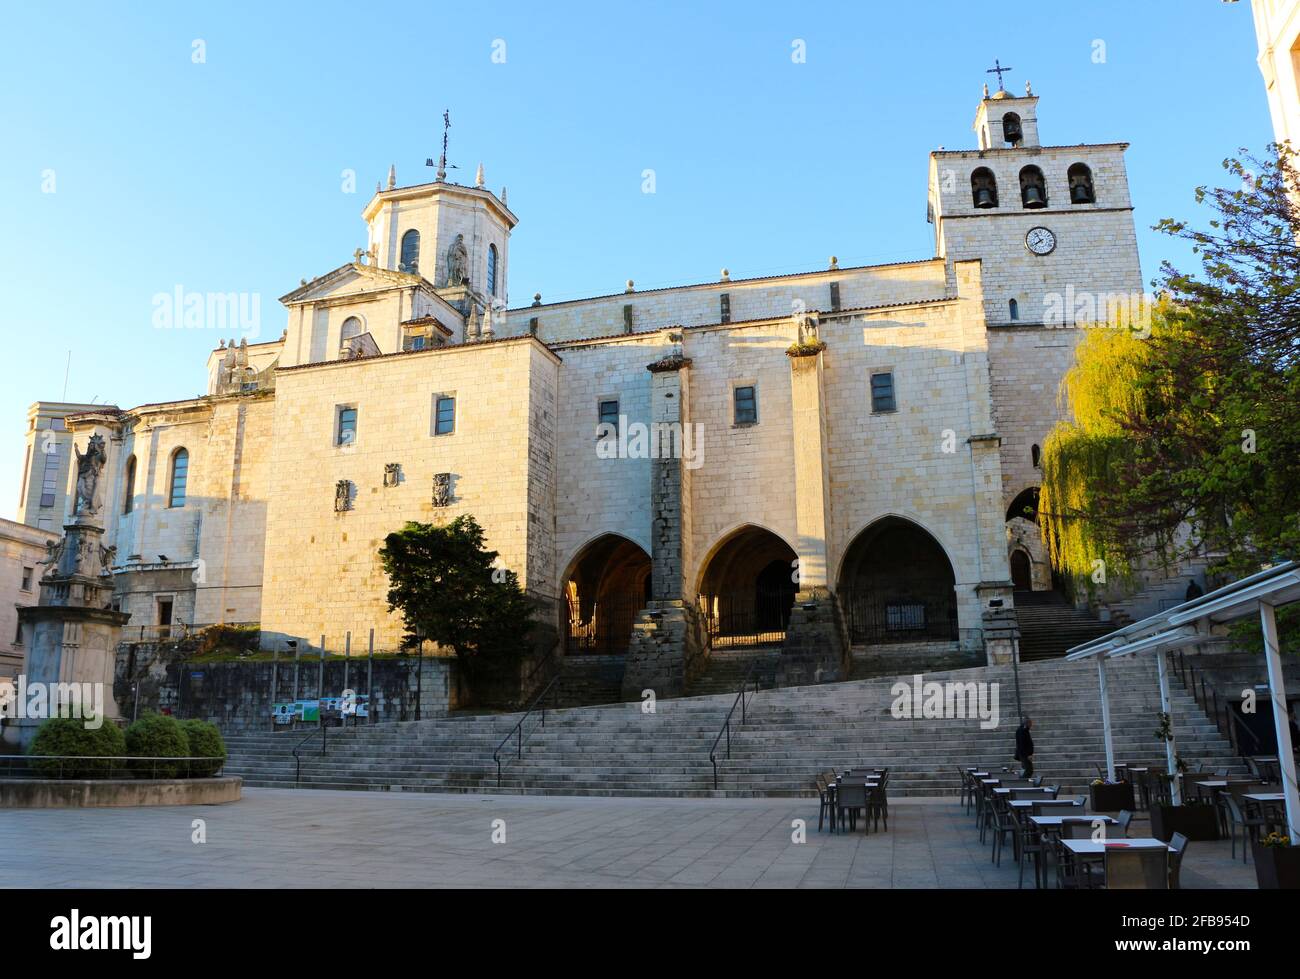 Santander Cathedral from the Plaza Asuncion in the city centre of Santander Cantabria Spain with a statue of the Virgin Mary in front Morning sun Stock Photo